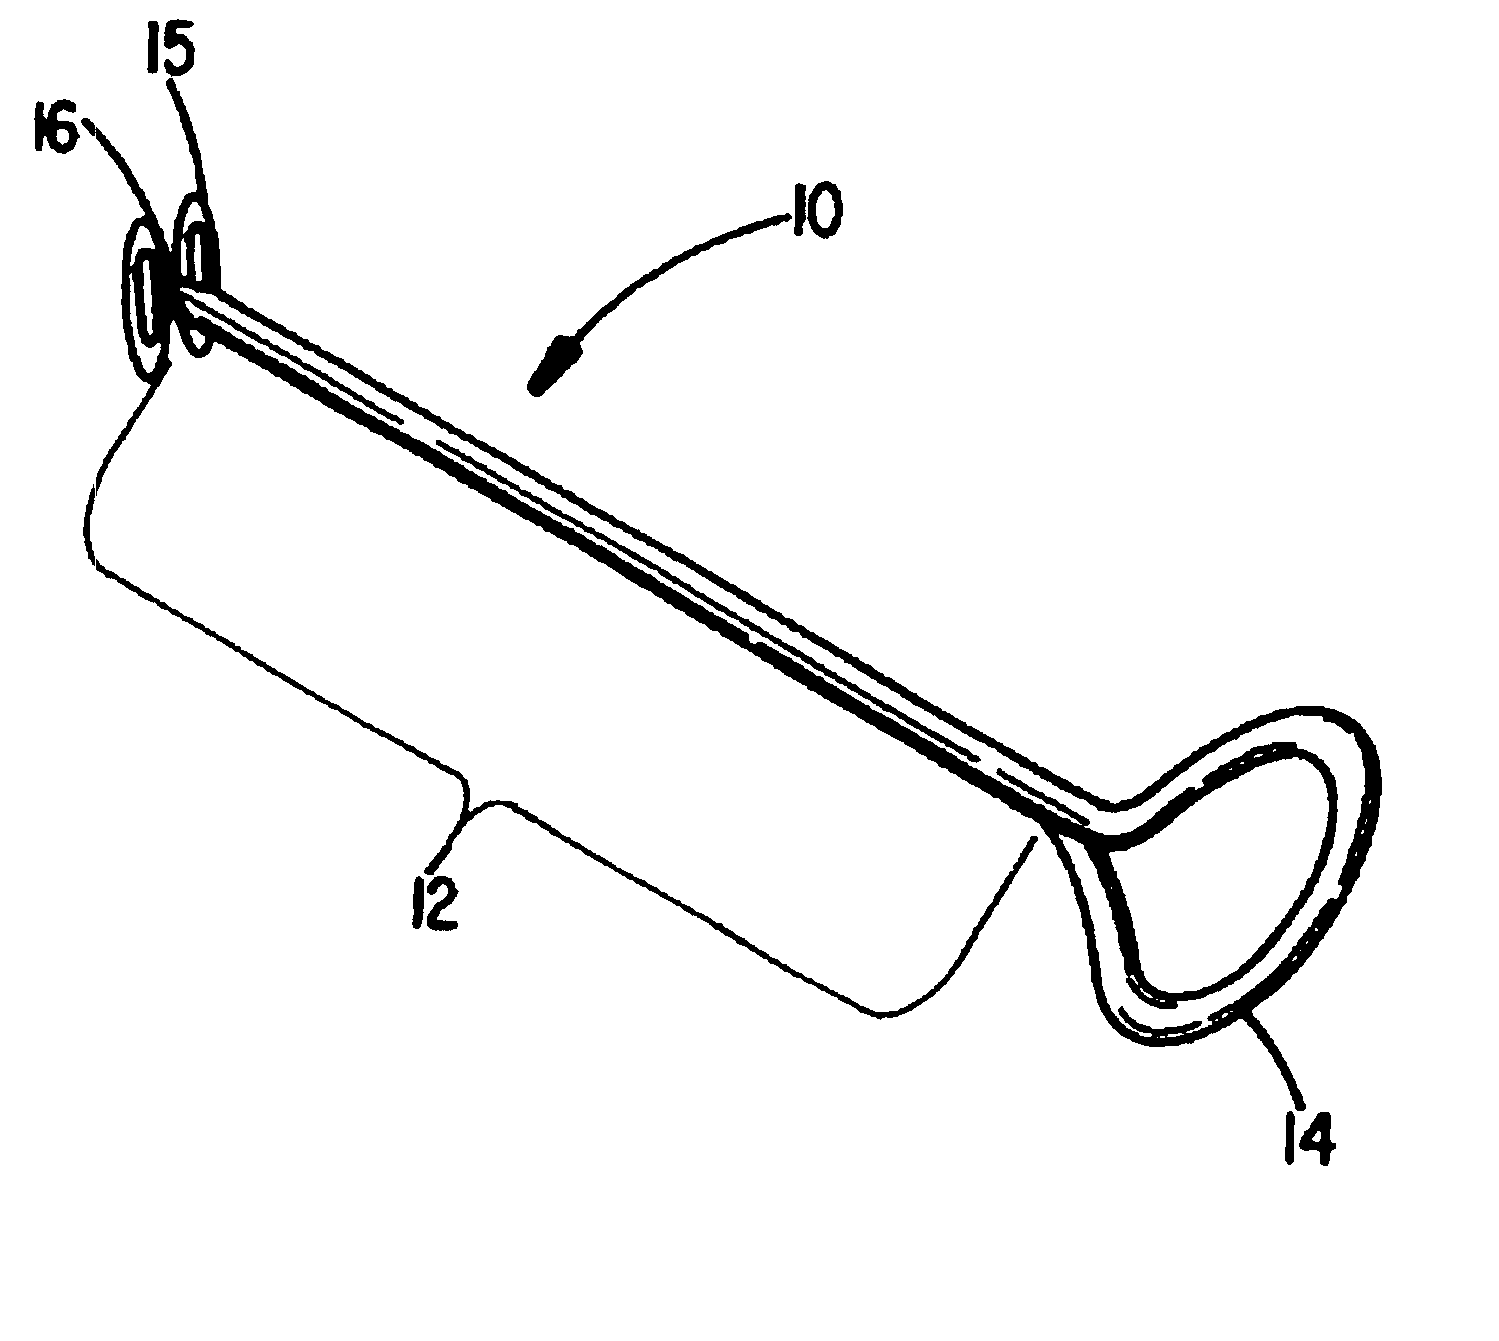 Female incontinence prevention device